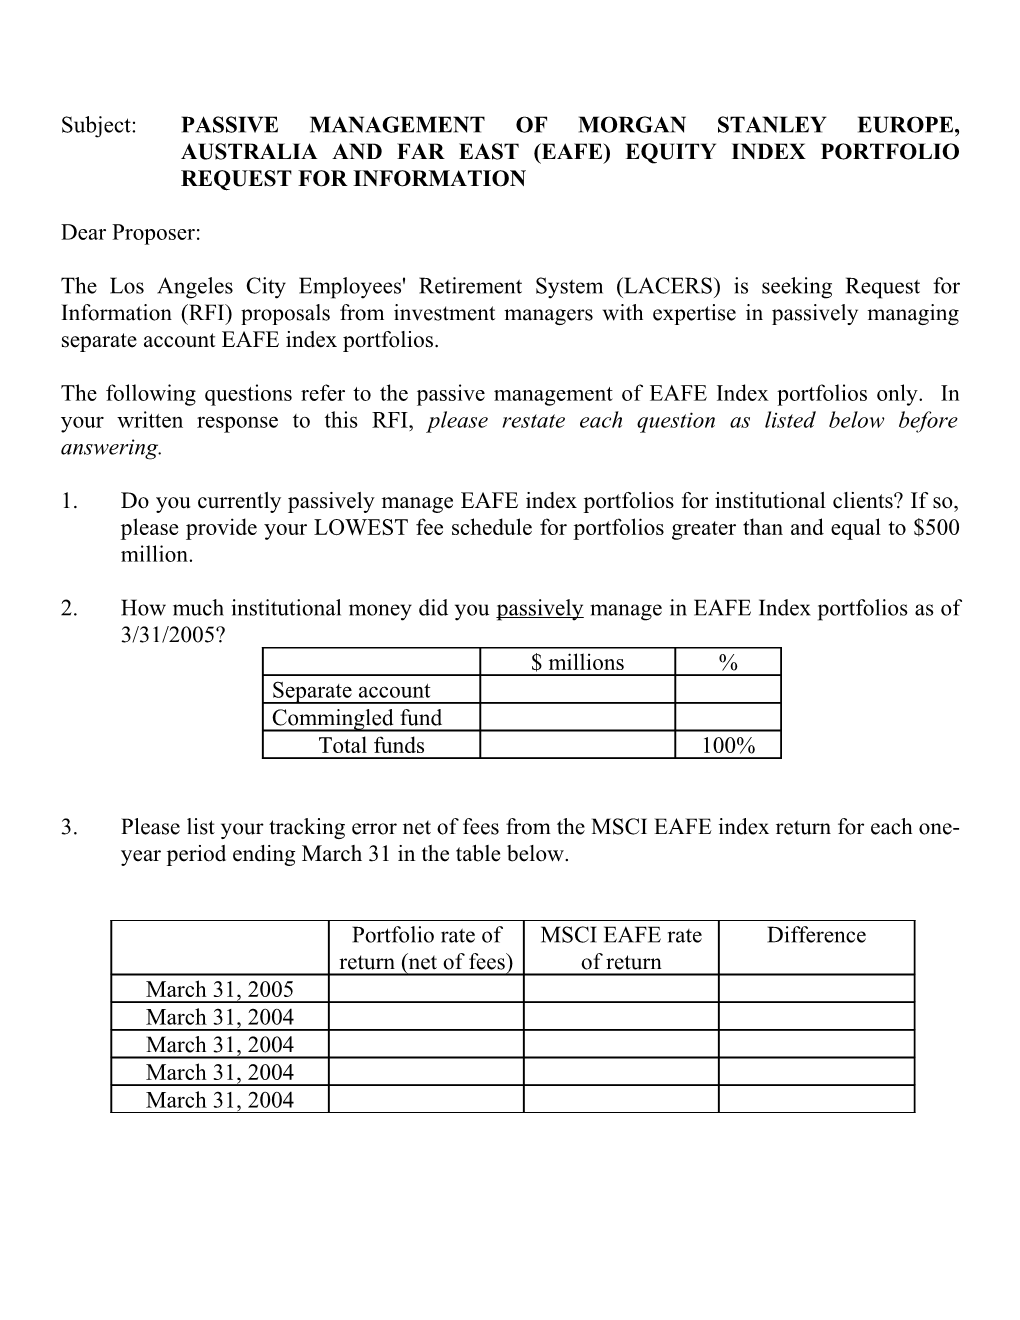 Subject: PASSIVE MANAGEMENT of MORGAN STANLEY EUROPE, AUSTRALIA and FAR EAST (EAFE) EQUITY